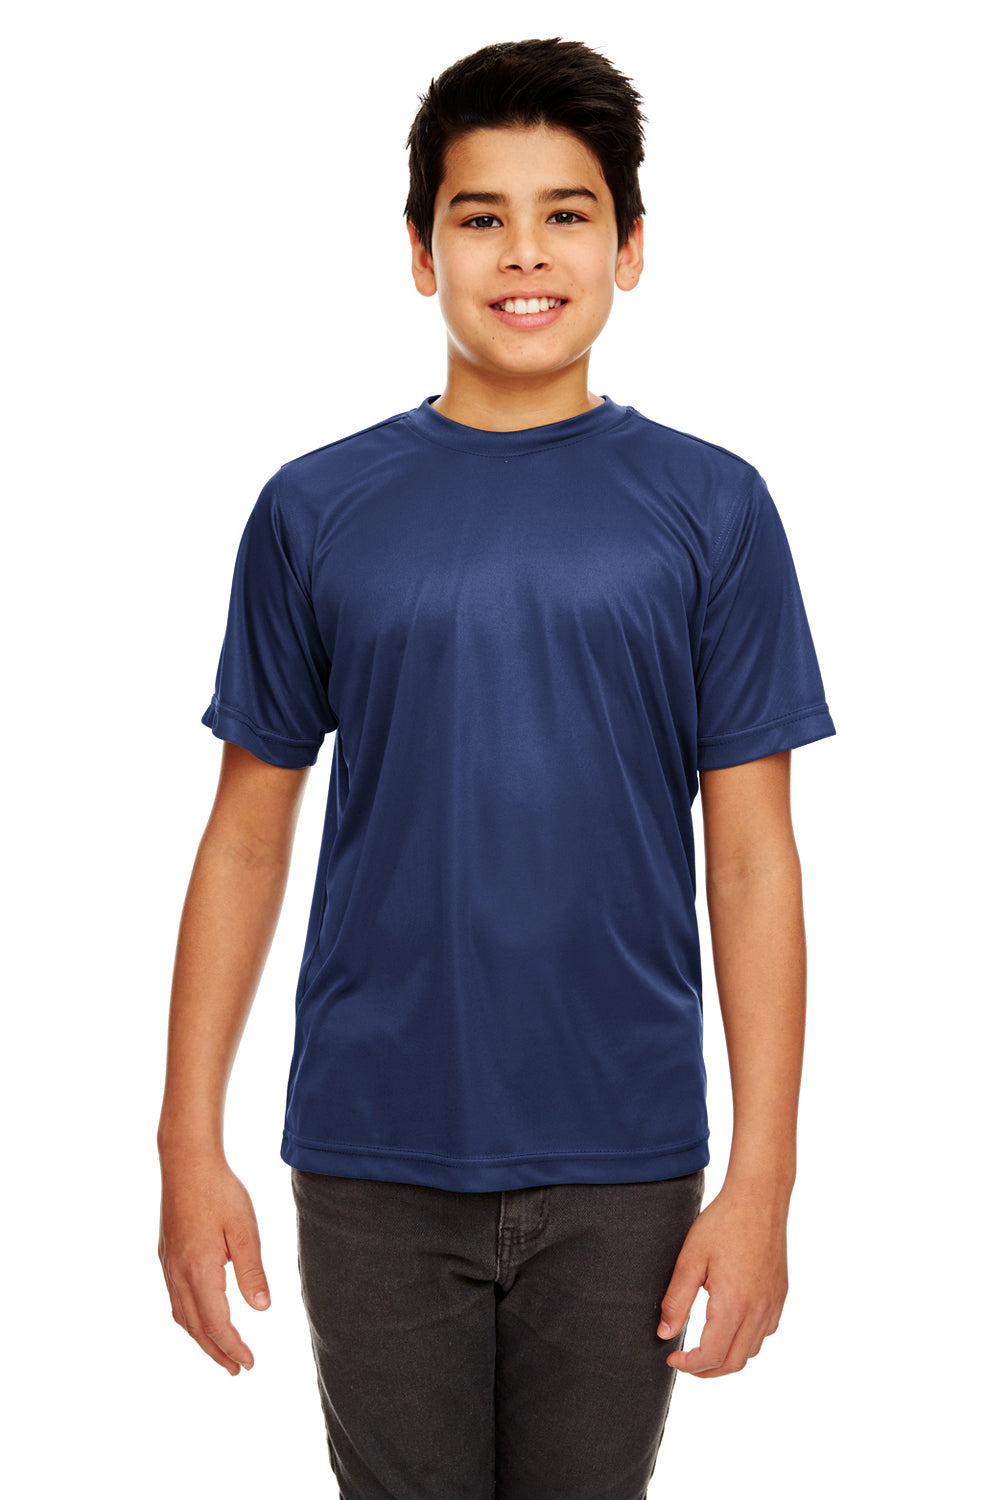 UltraClub 8420Y Youth Cool & Dry Performance Moisture Wicking Short Sleeve Crewneck T-Shirt Navy Blue Front